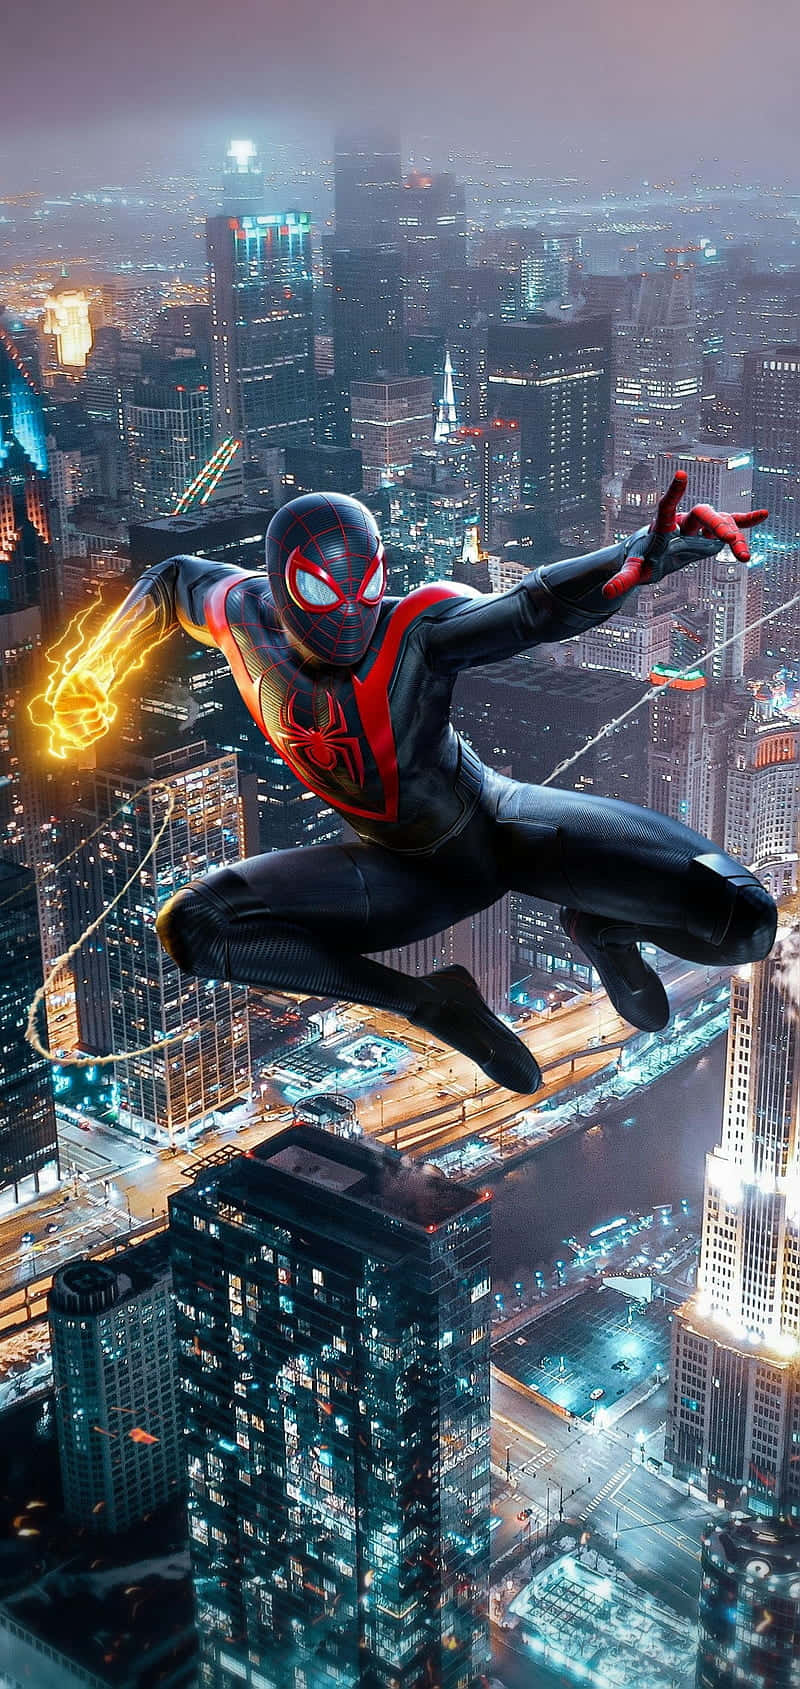 Step into an Amazing Spider-Man Adventure with this Iphone Wallpaper